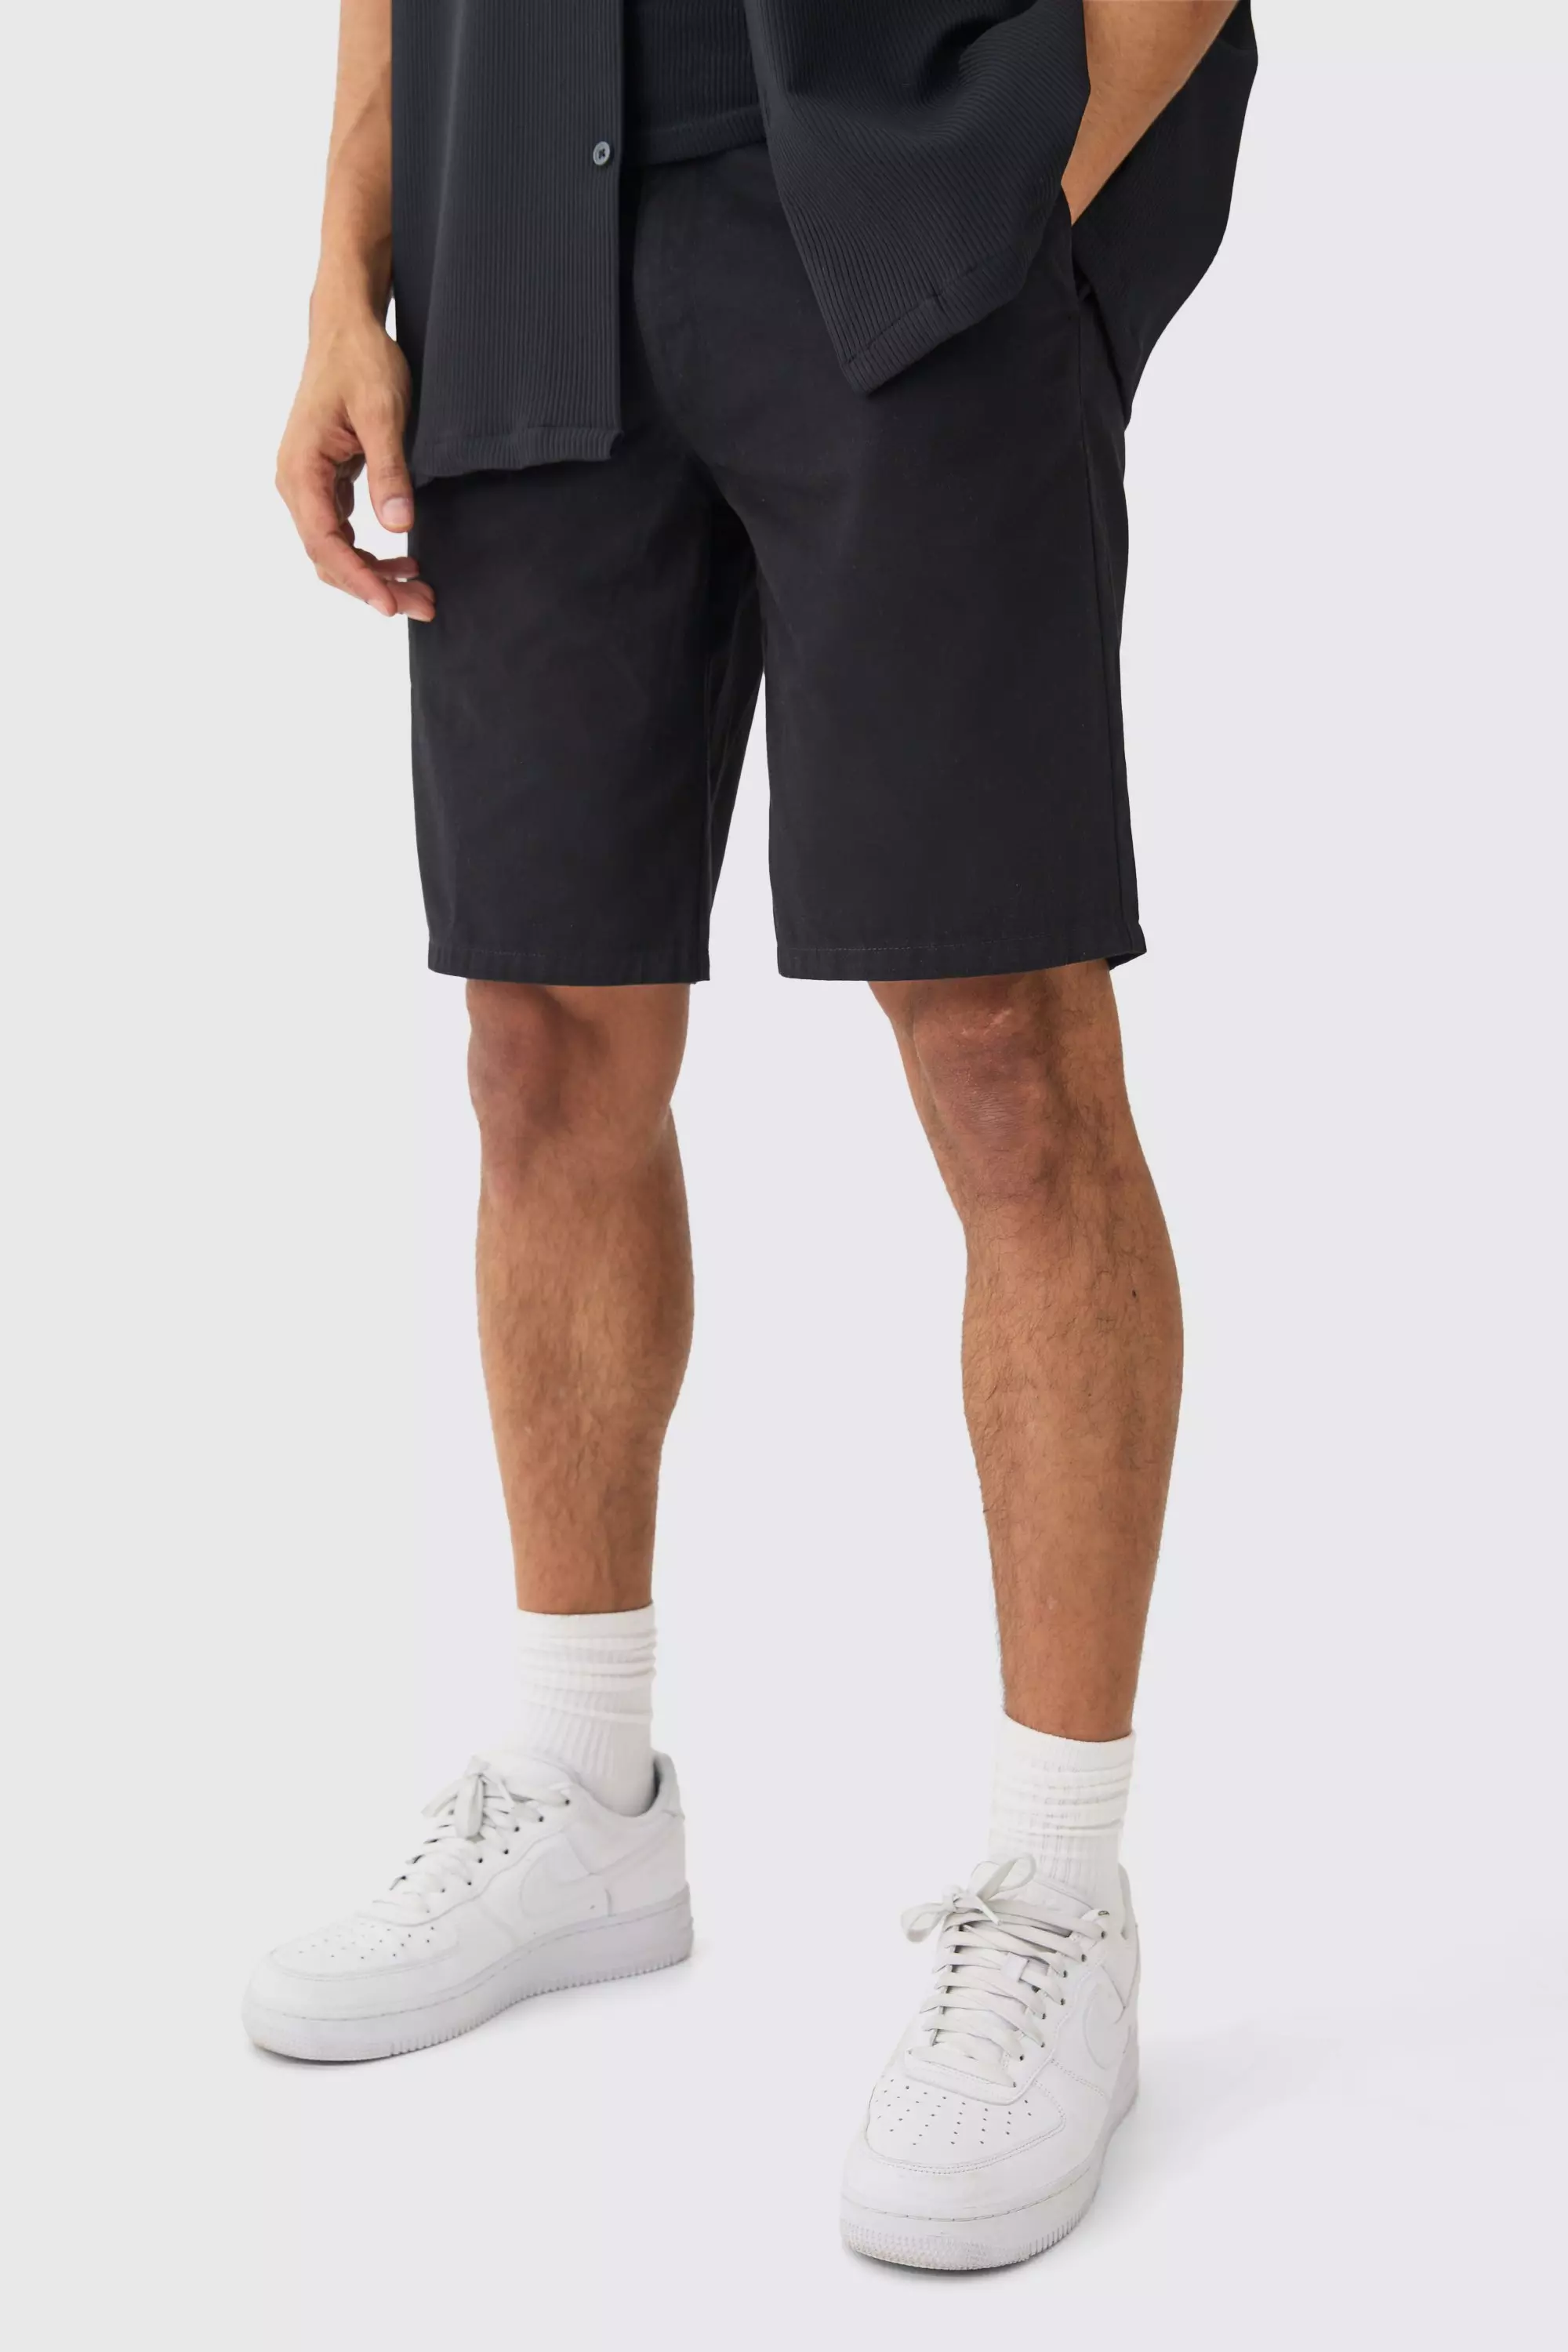 Fixed Waist Black Relaxed Fit Short Shorts Black